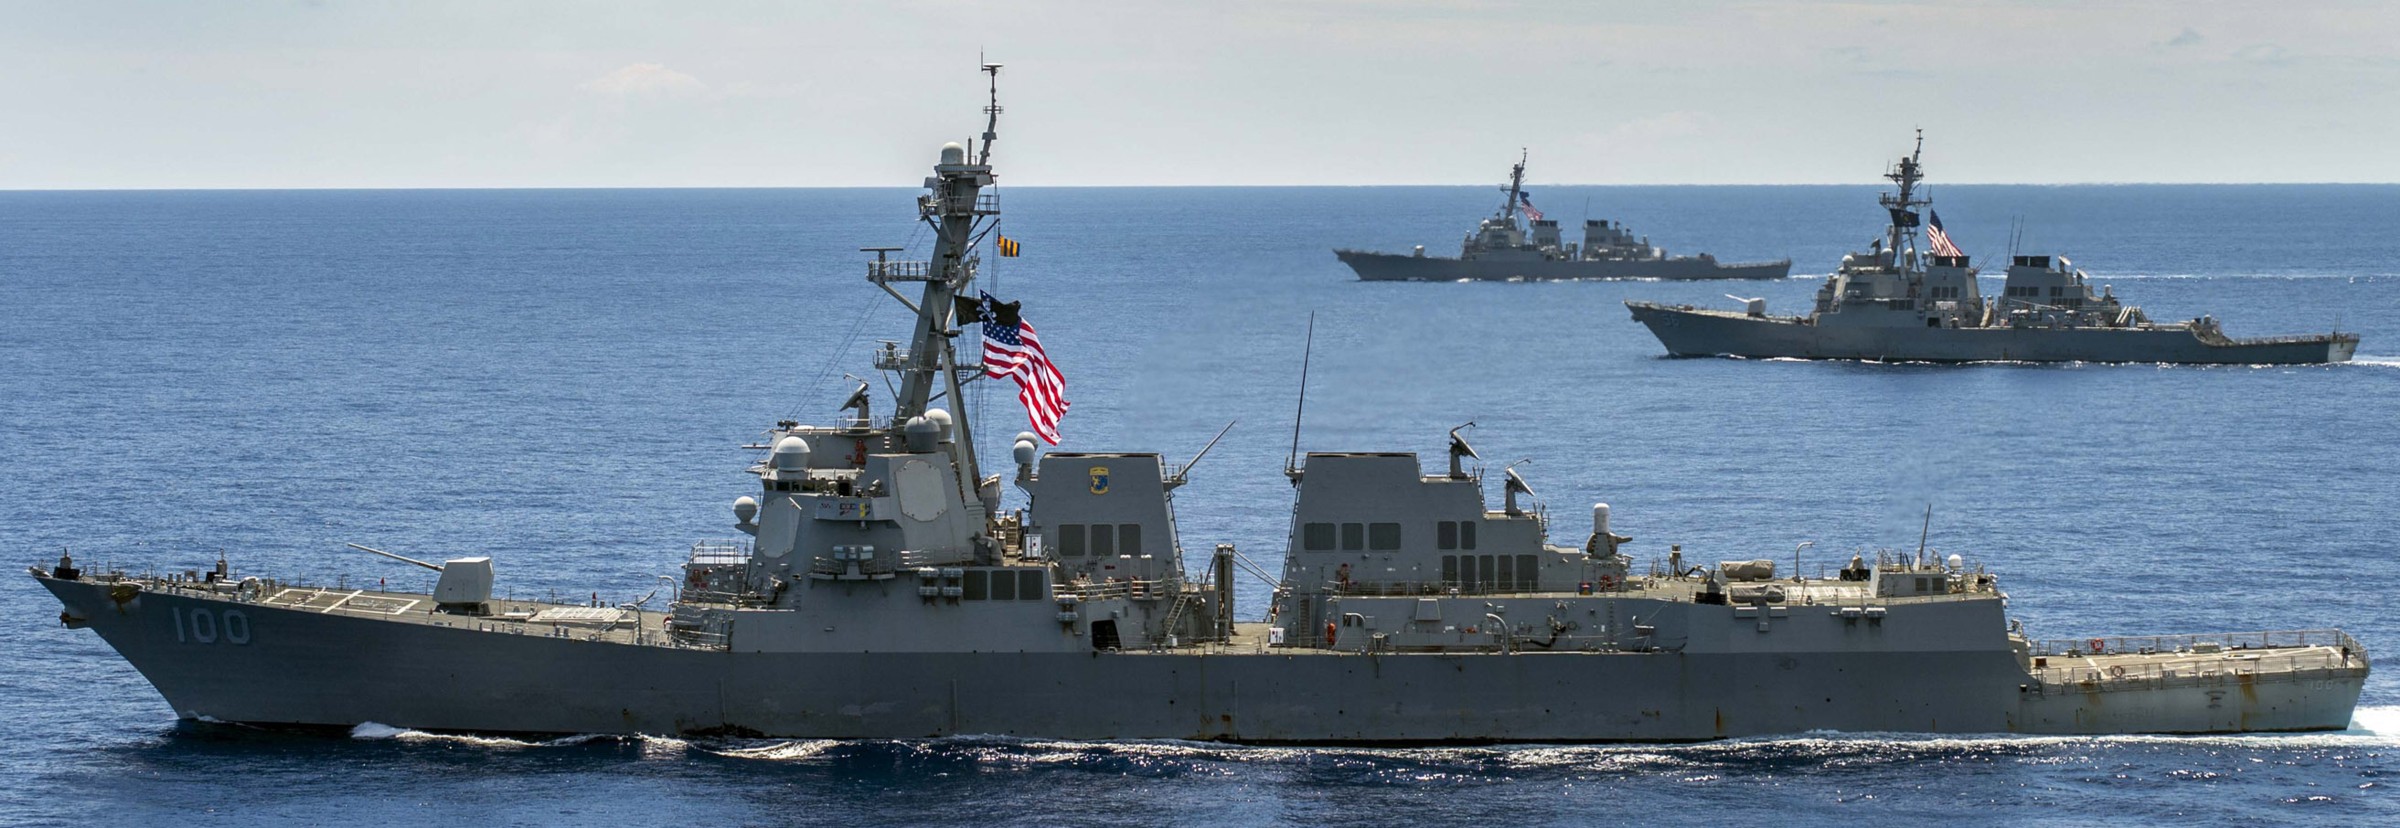 ddg-100 uss kidd arleigh burke class guided missile destroyer aegis us navy south china sea 18